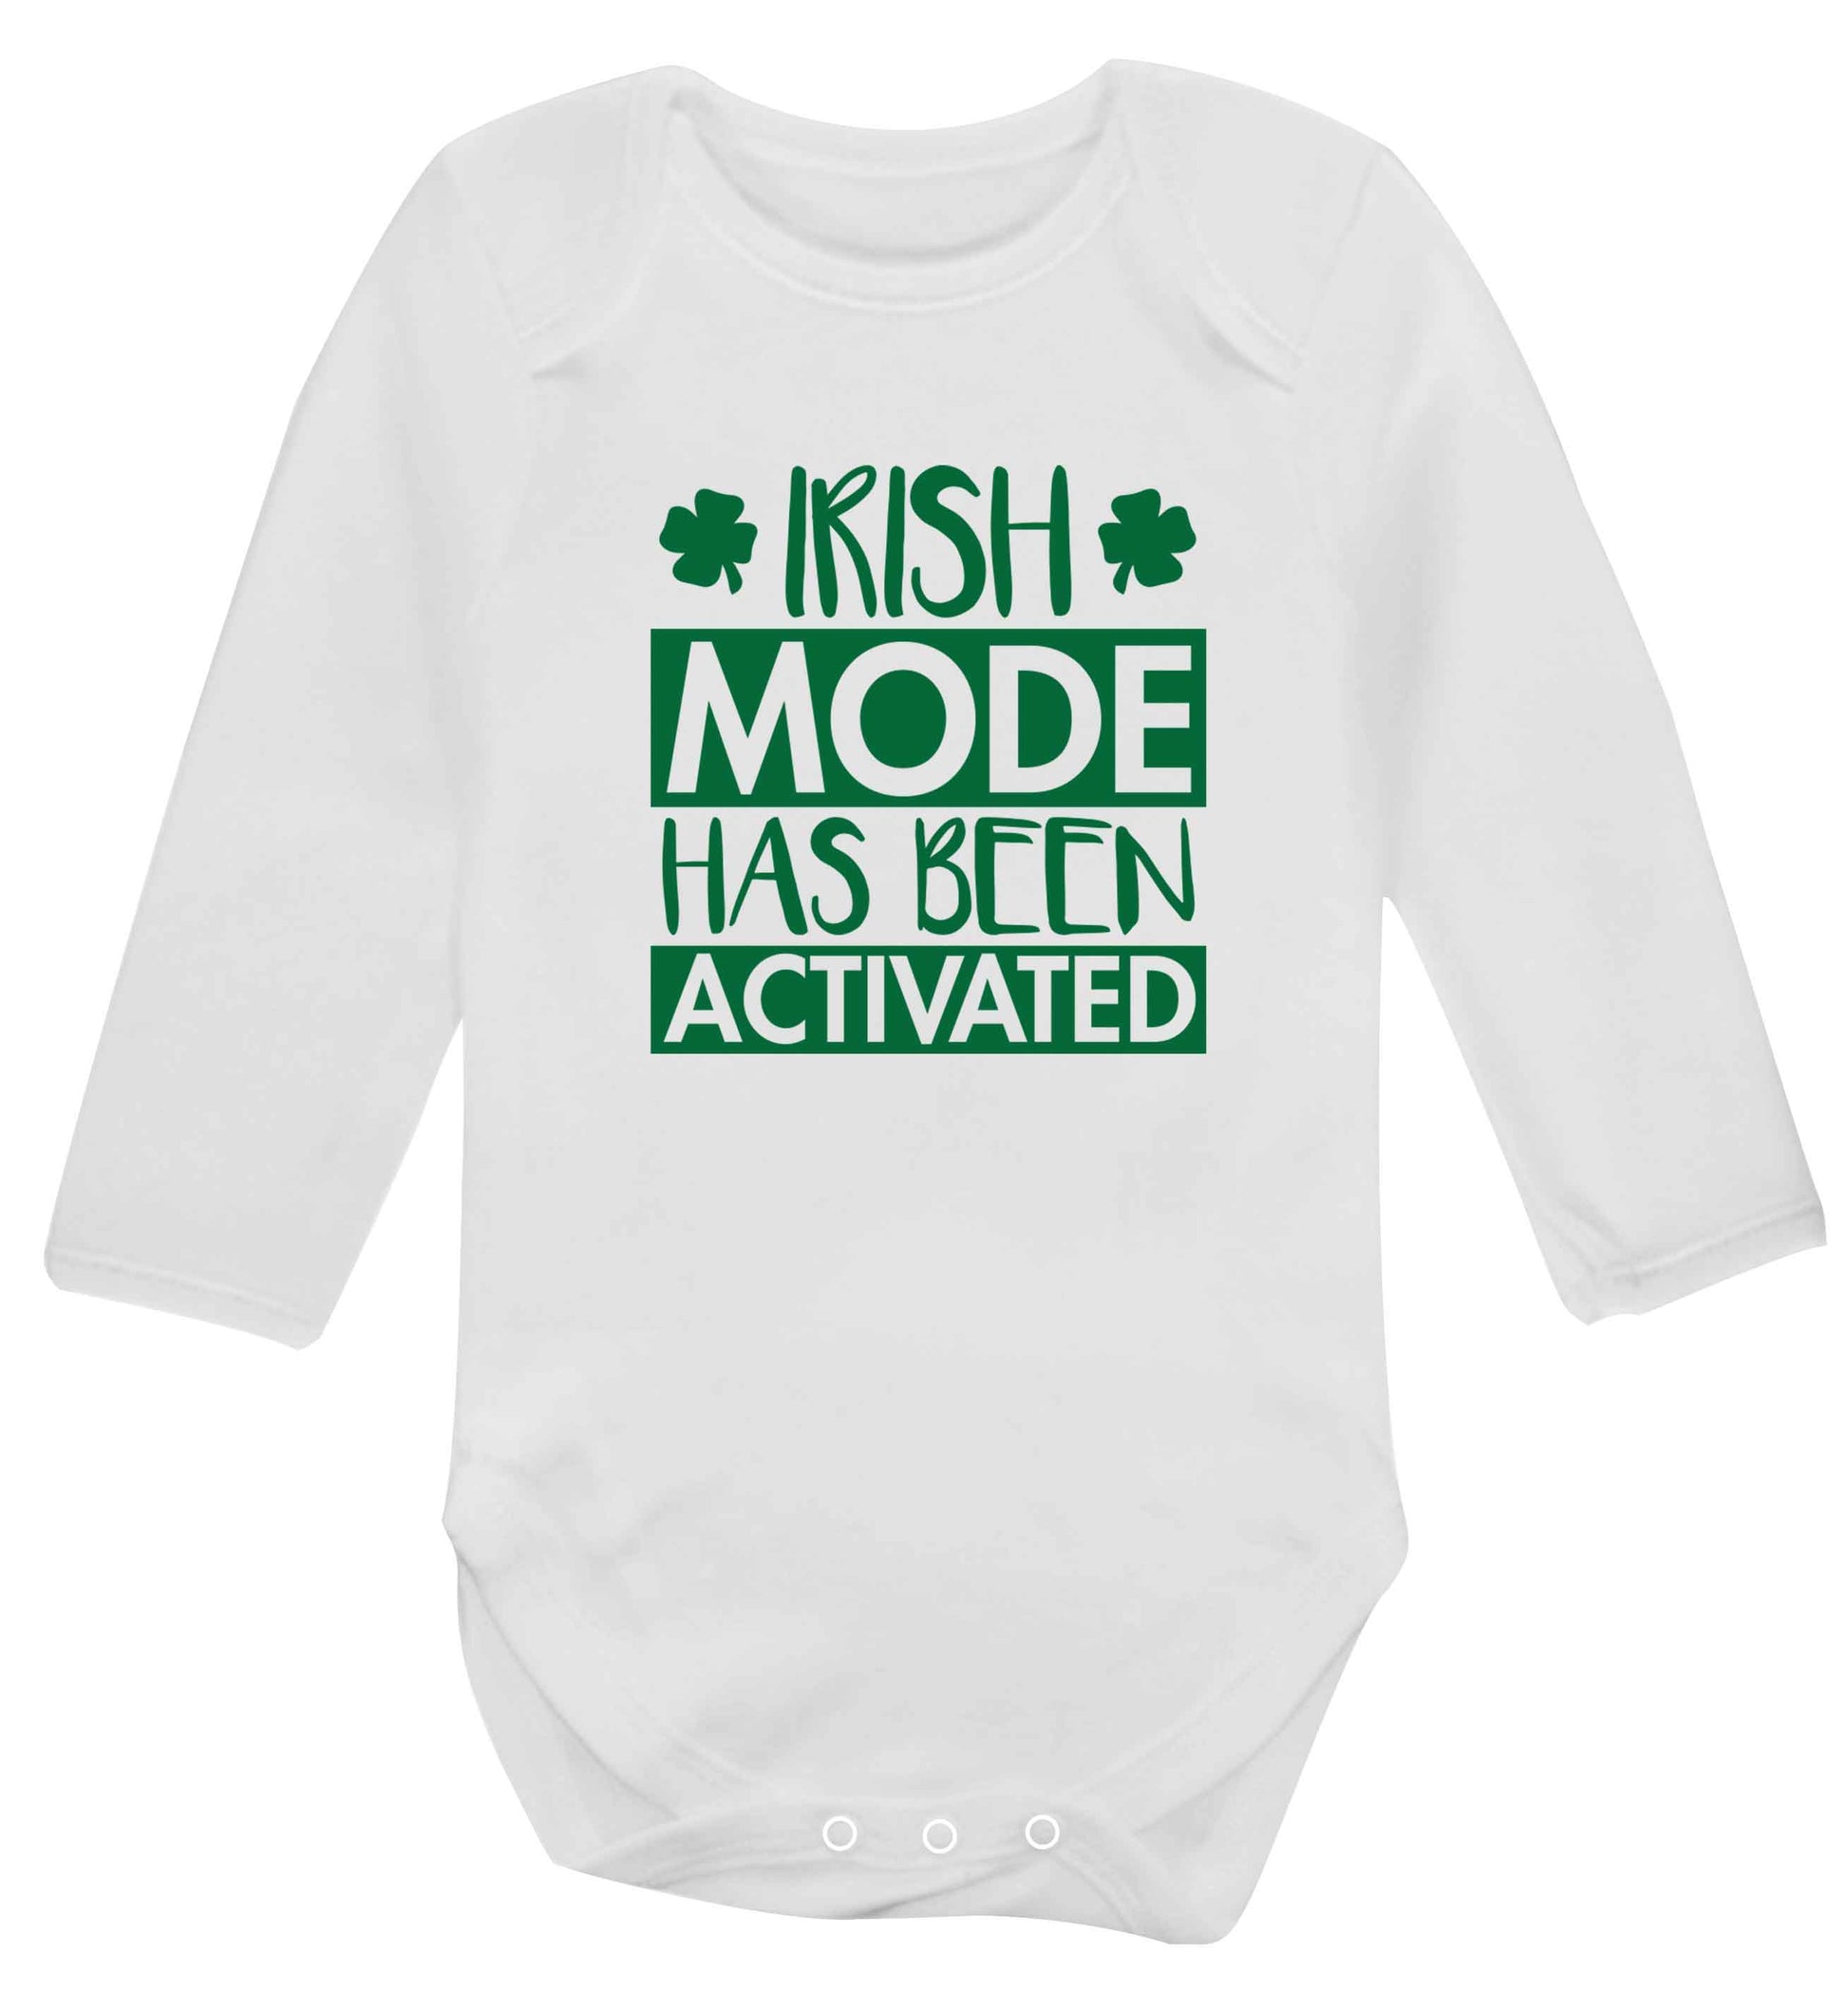 Irish mode has been activated baby vest long sleeved white 6-12 months